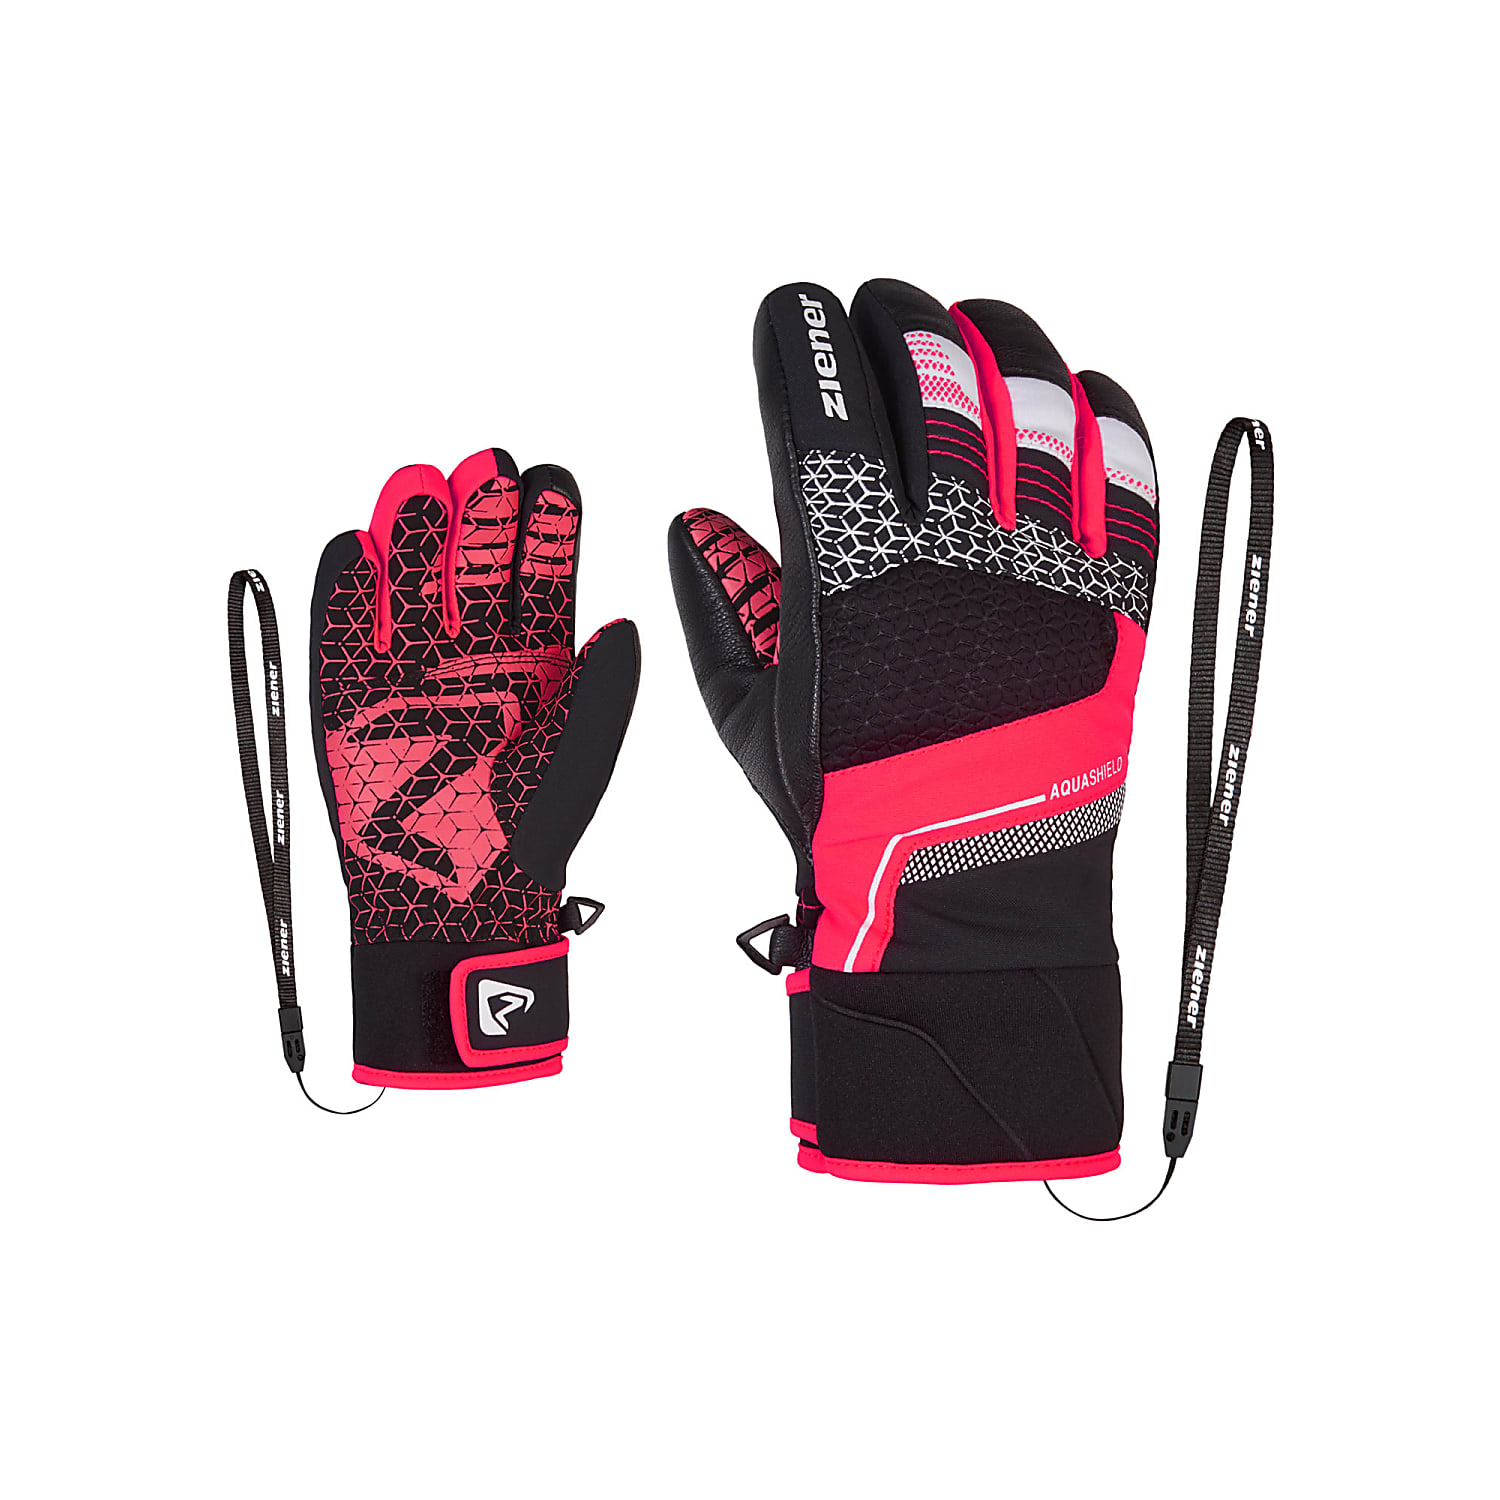 PR LONZALO and JUNIOR Fast Neon - - Black GLOVE, AS Ziener shipping Pink cheap